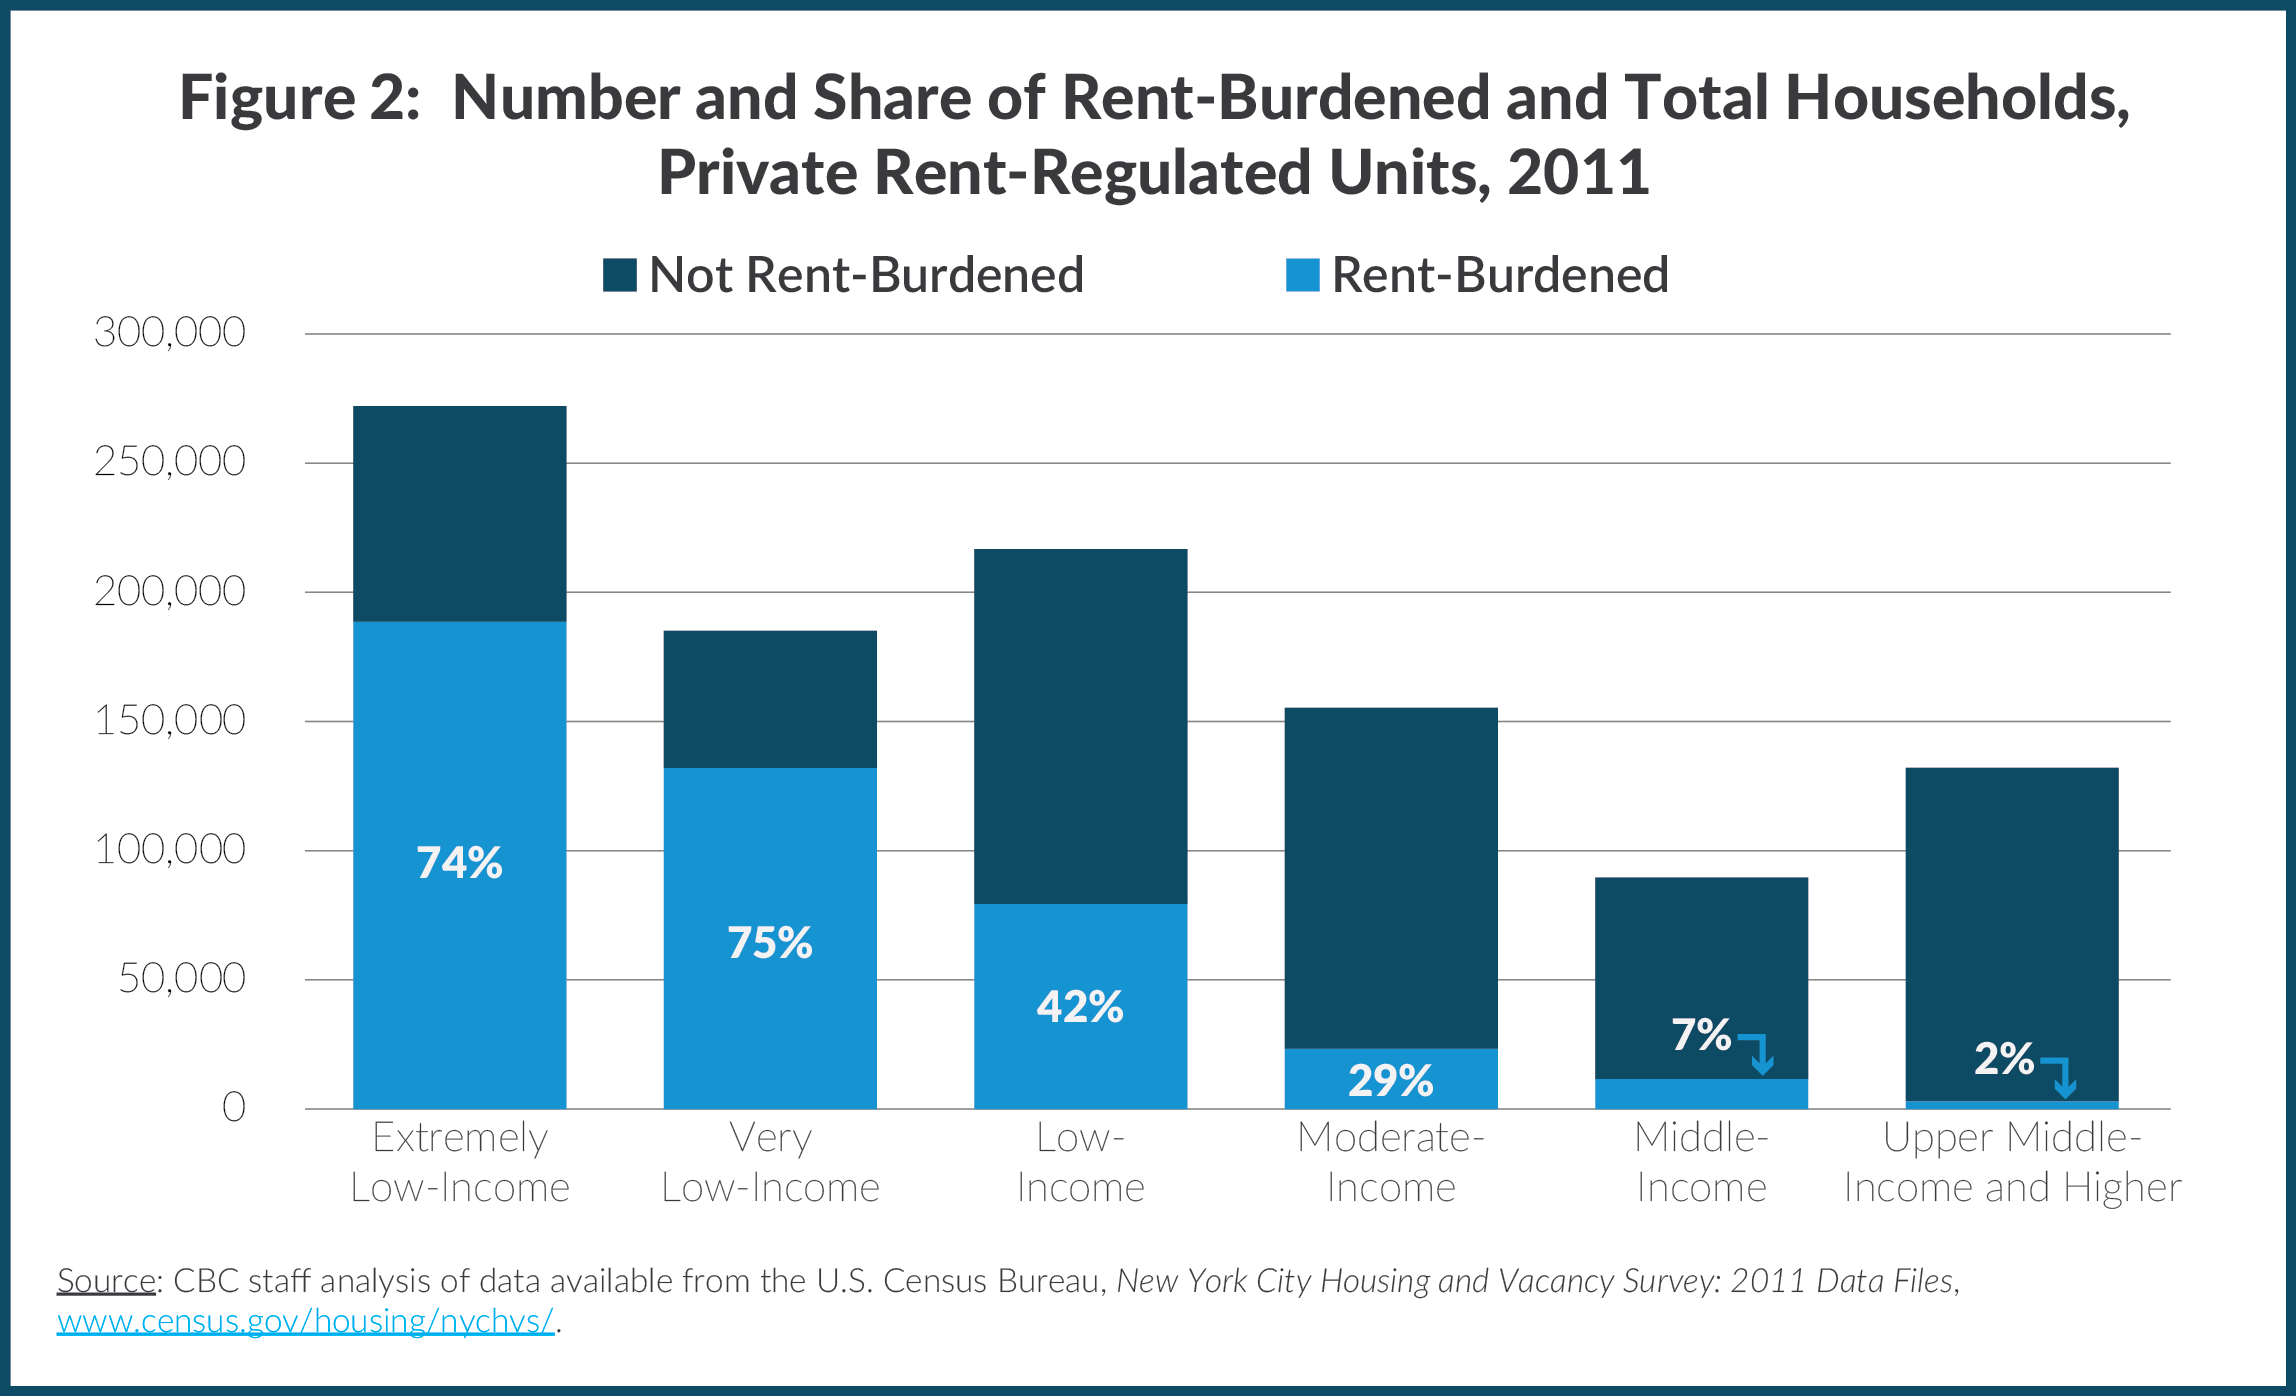 Stacked bar chart showing number and share of rent-burdened and total households in private, rent-regulated units in New York City, 2011